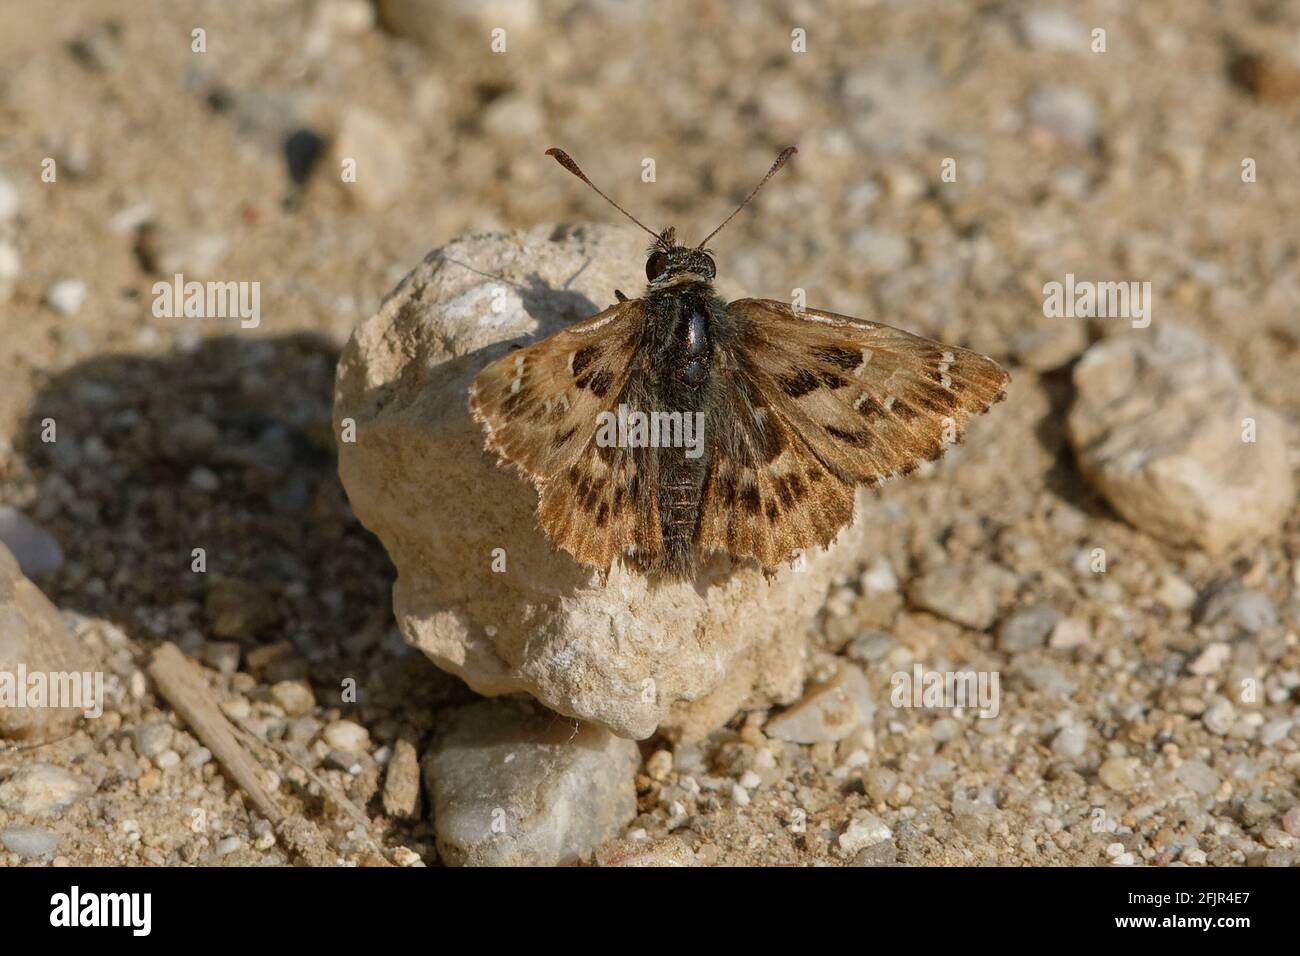 Mallow skipper (Carcharodus alceae) resting on a stone Stock Photo